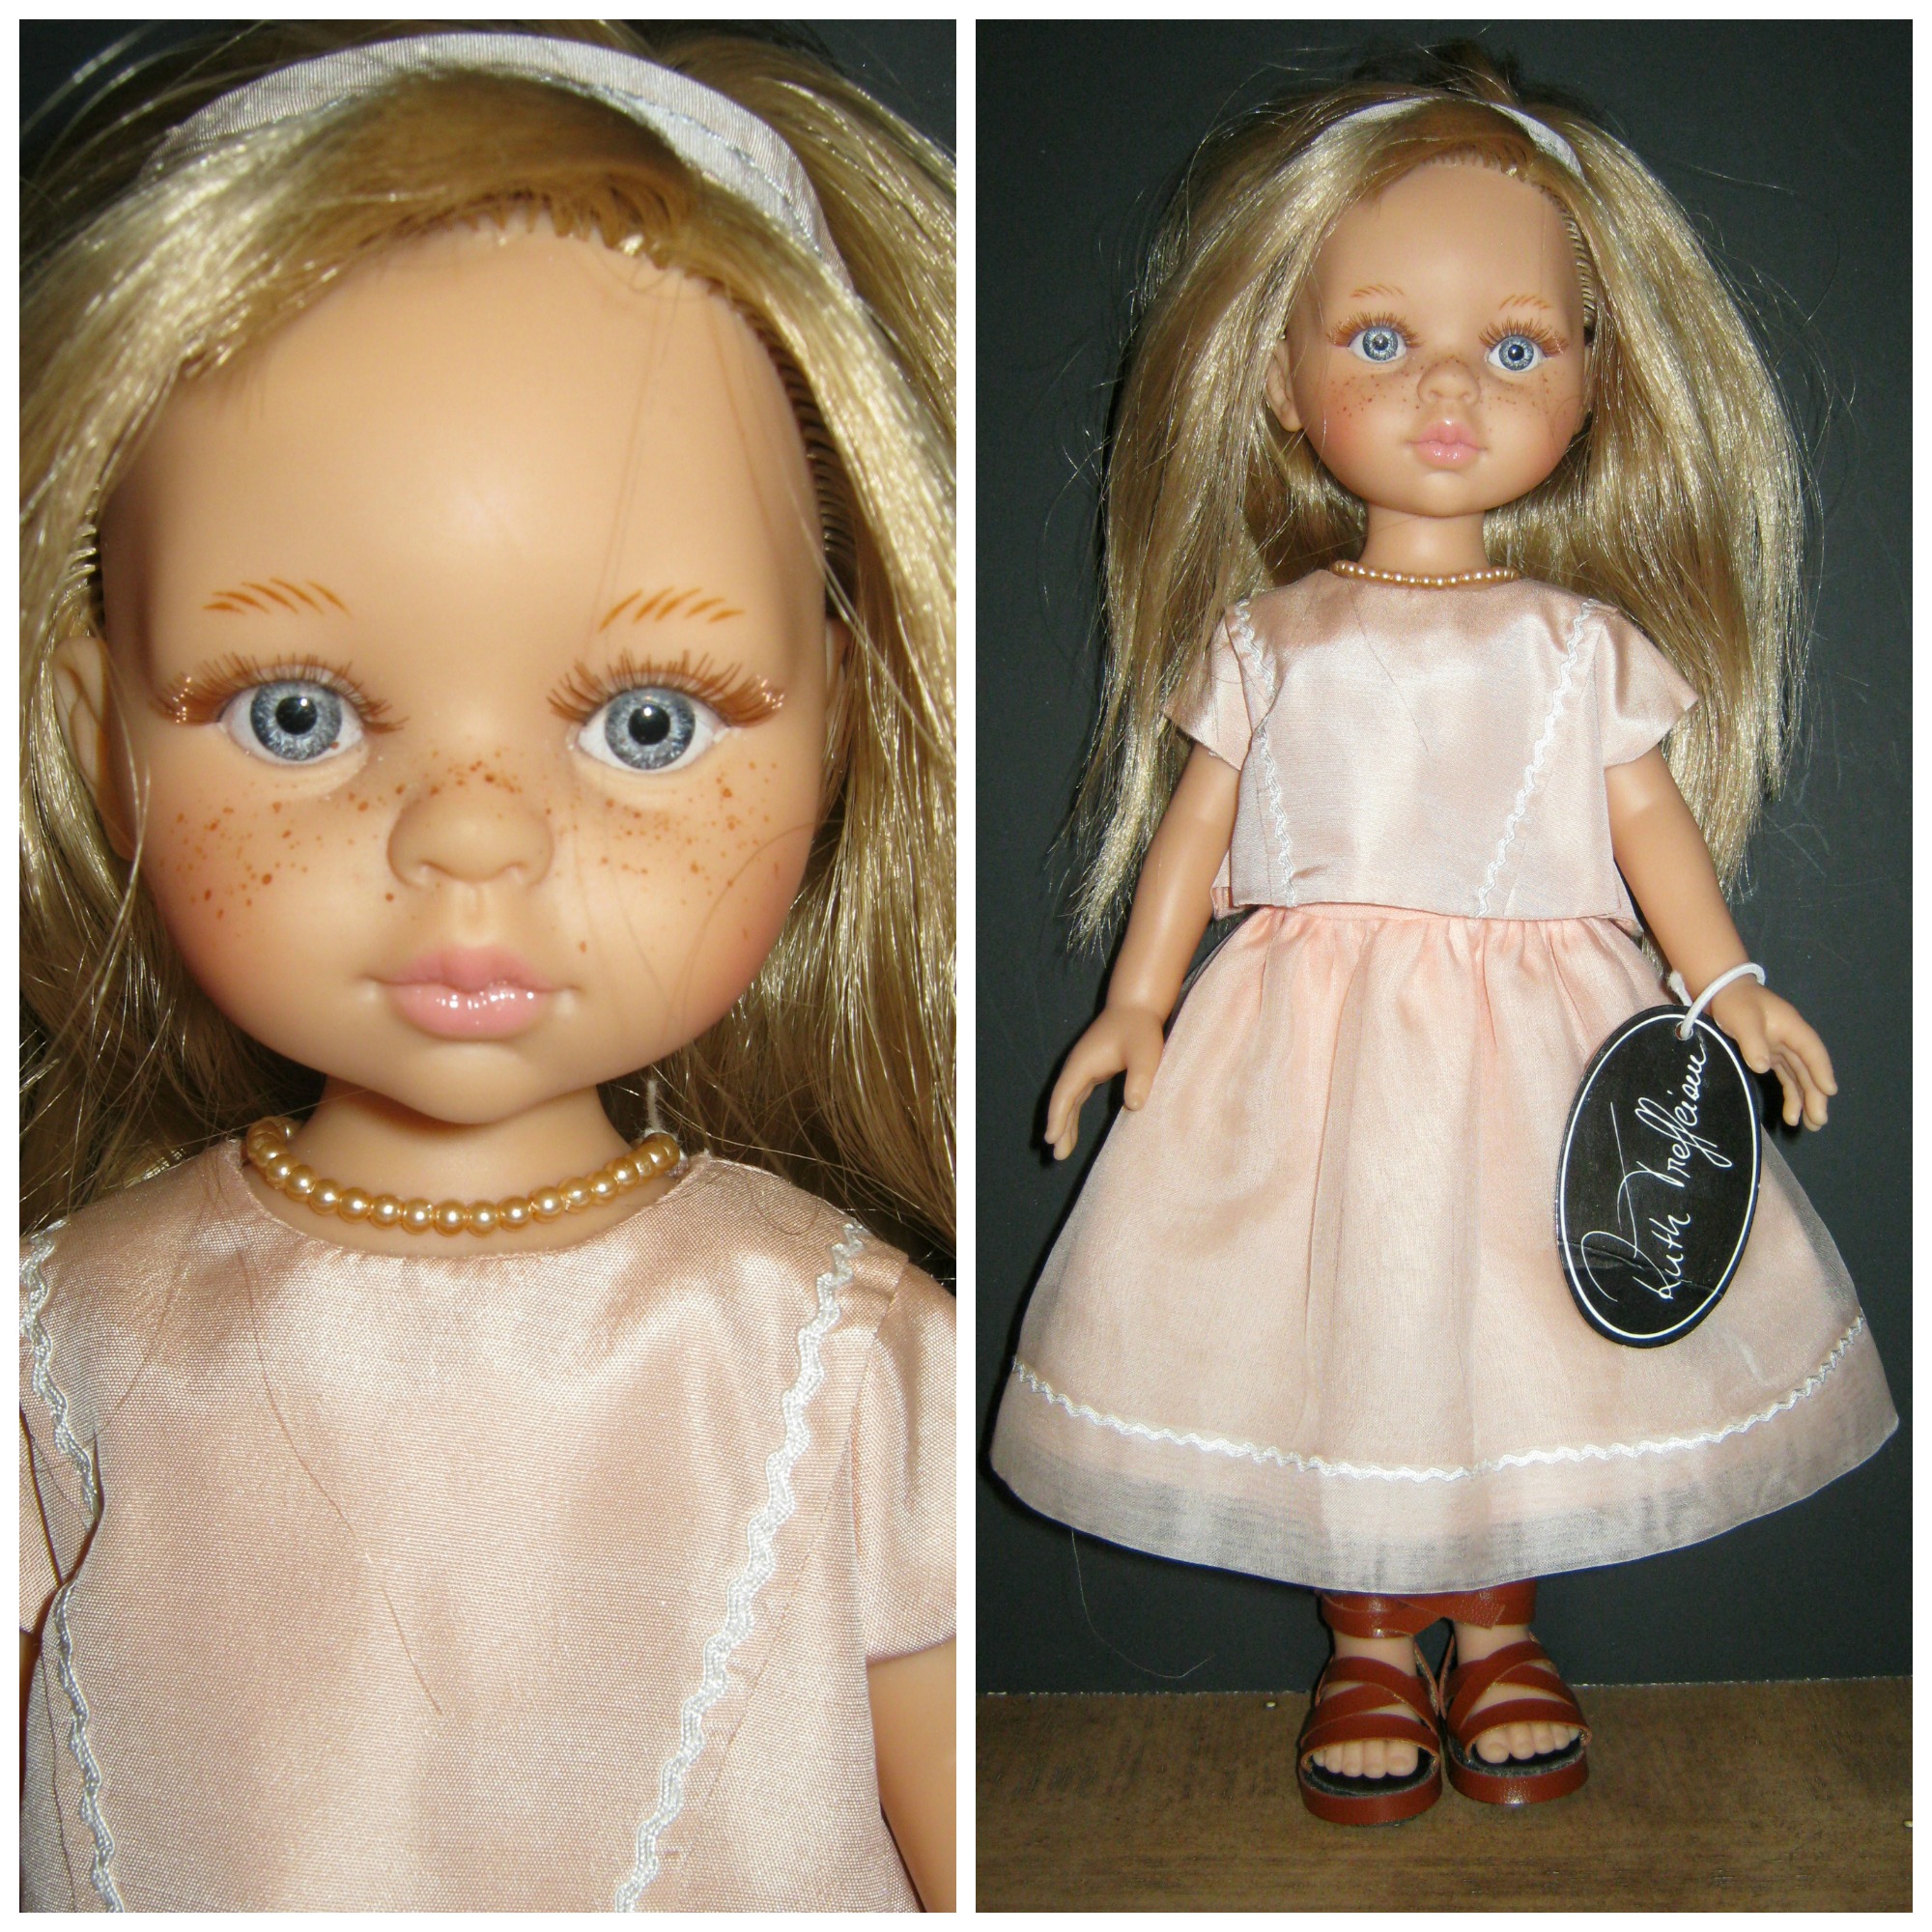 Ruth Treffeisen Collectible Carla Ii Doll By Paola Reina Sold For 83 Carol Smith S Asset